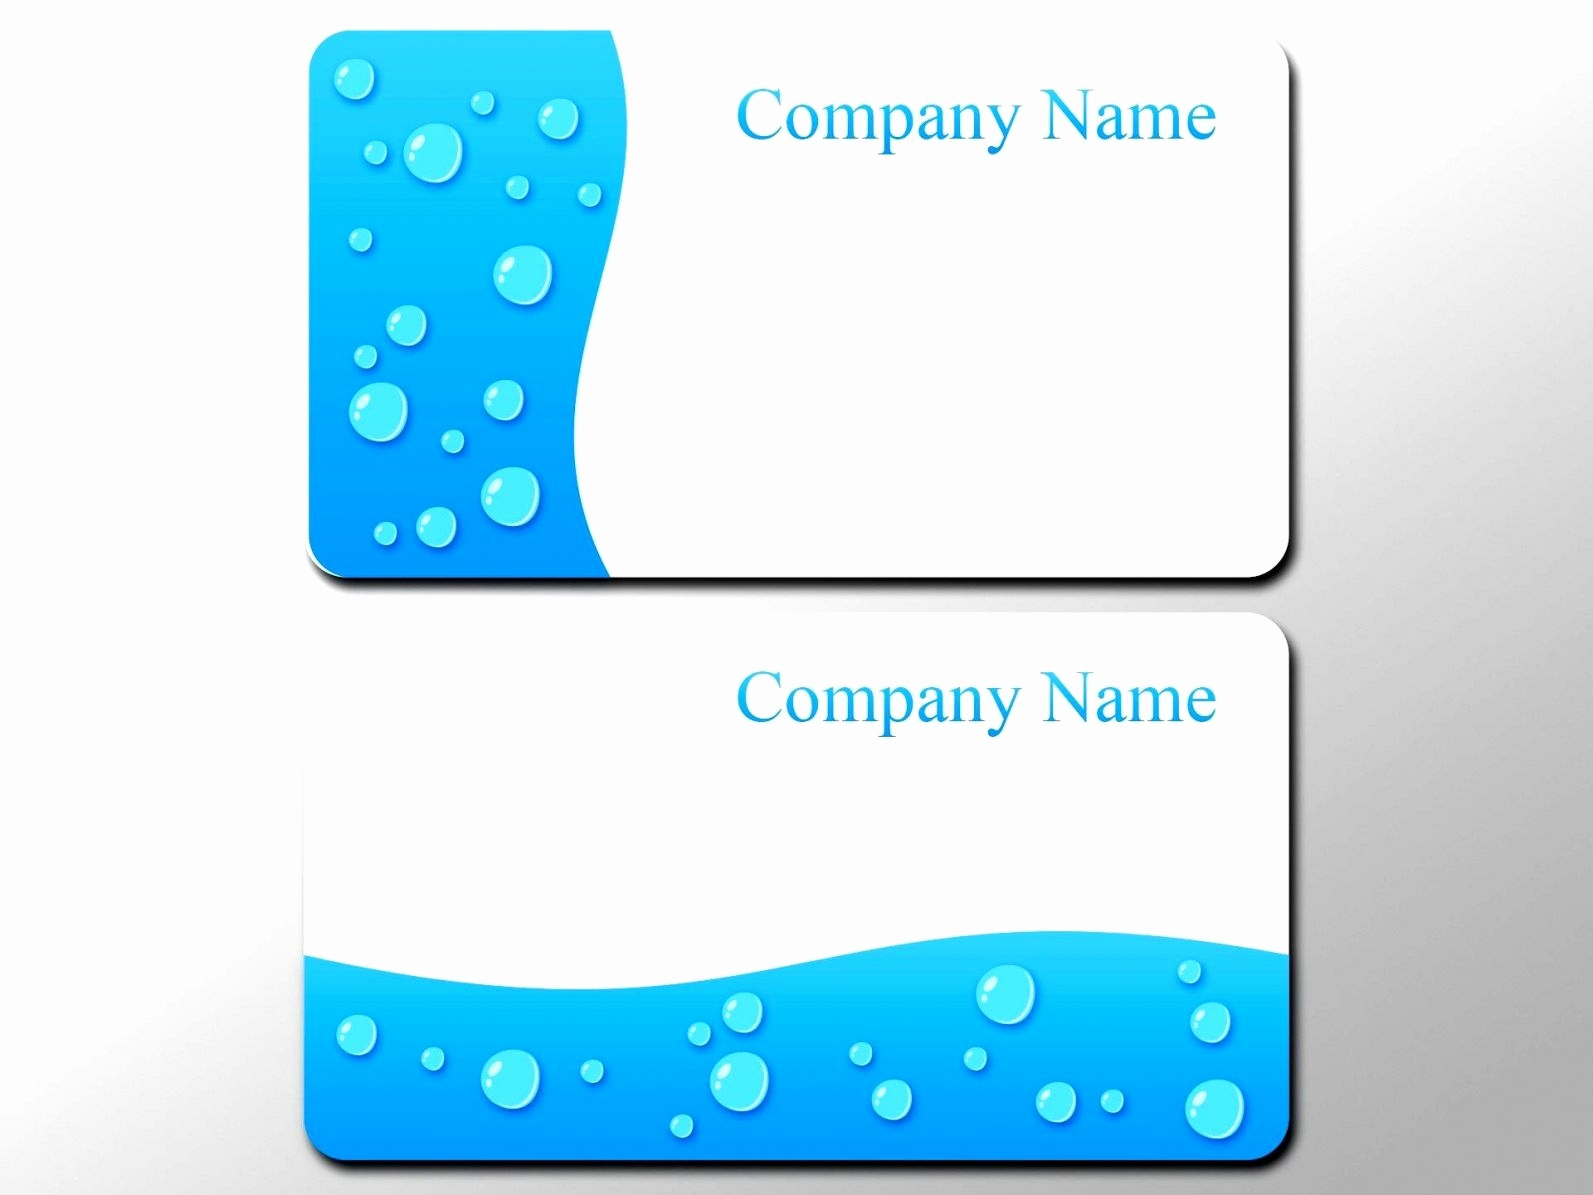 Business Card Format Photoshop Template Cc Beautiful For Within Business Card Size Photoshop Template